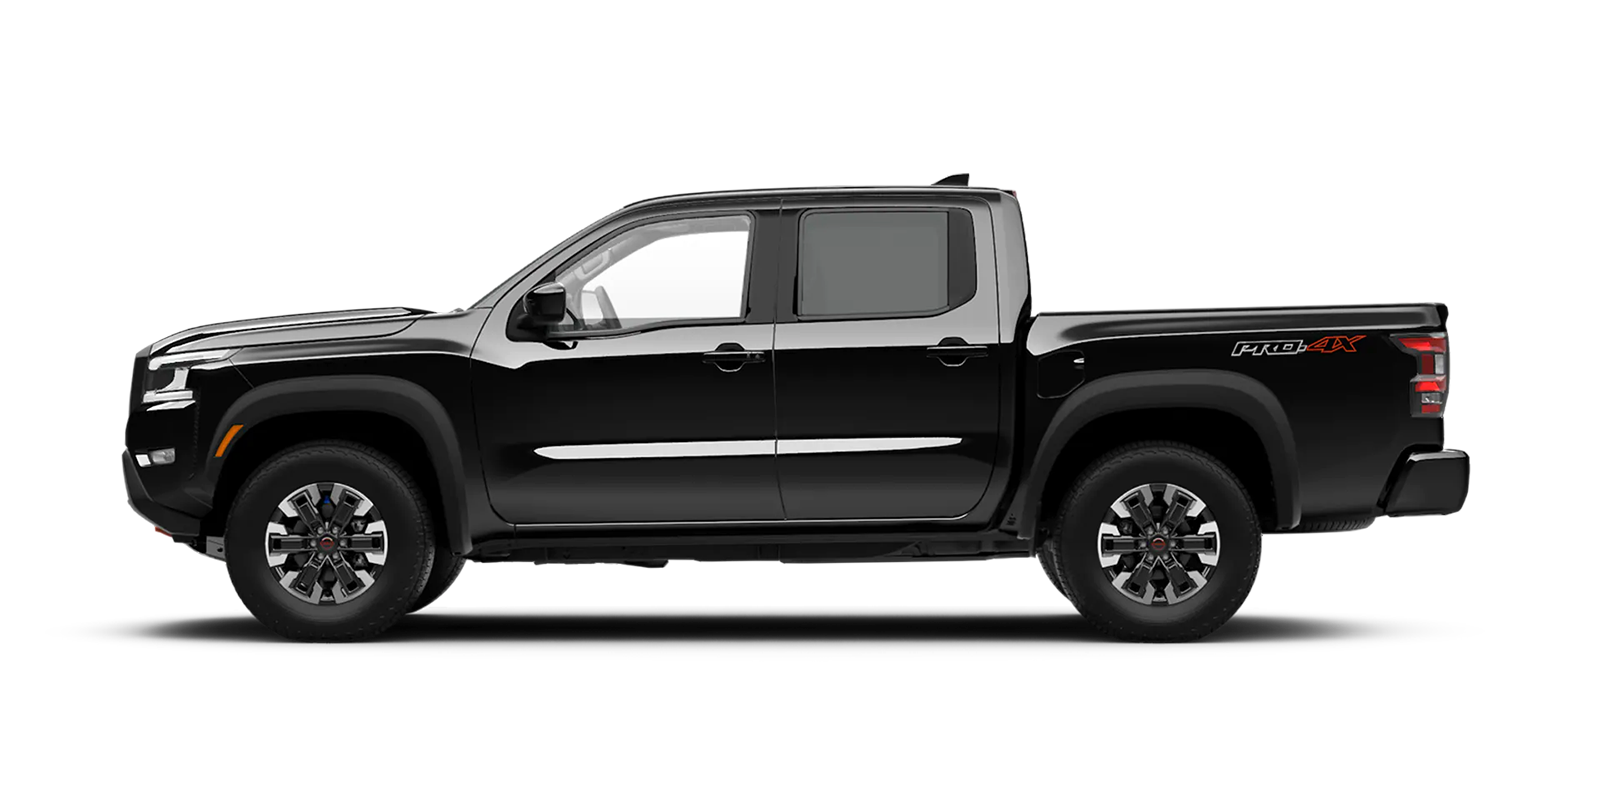 2022 Frontier Crew Cab Pro-4X 4x4 in Super Black | Courtesy Nissan PA in Altoona PA